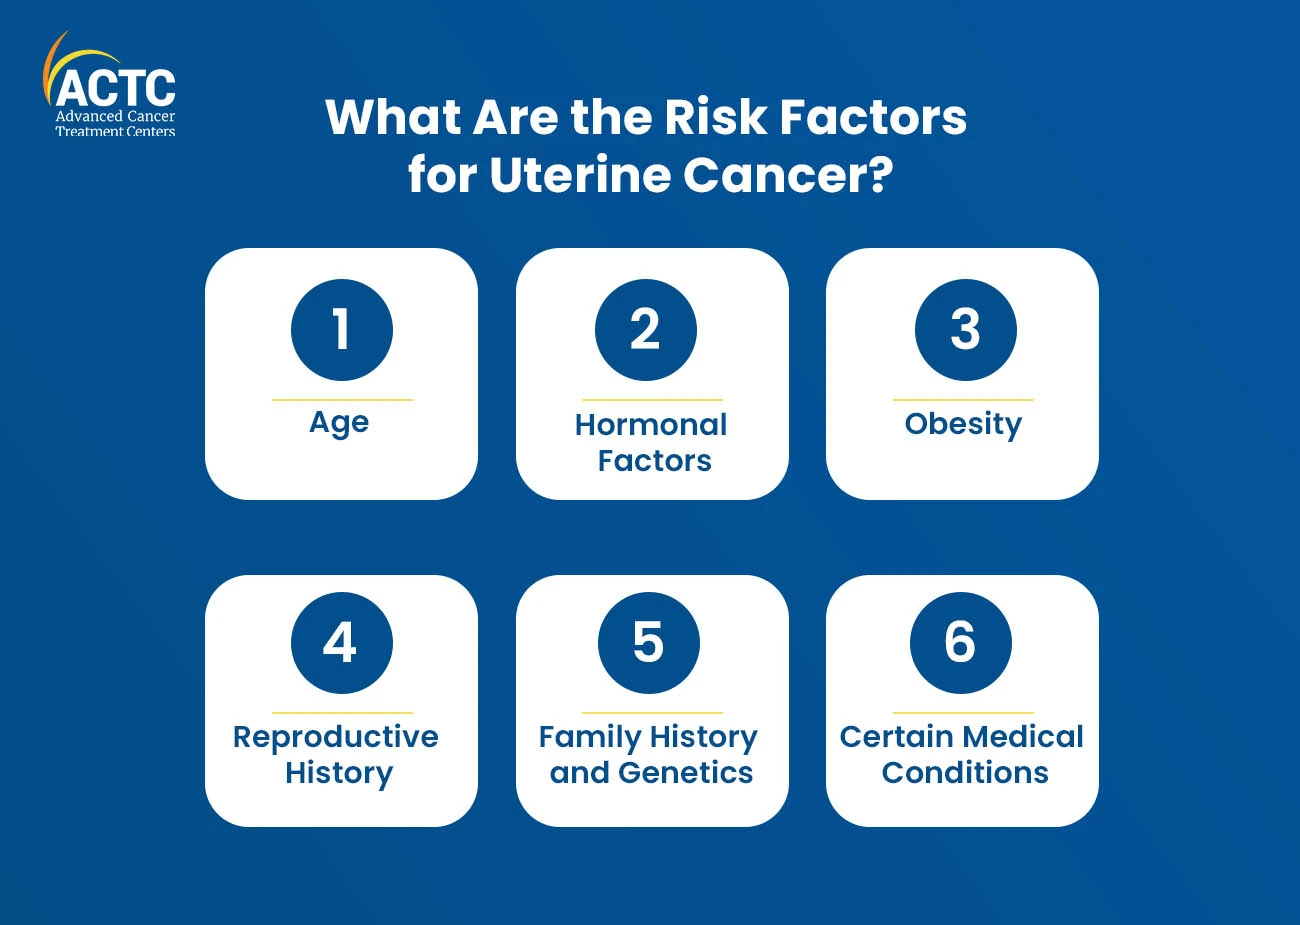 What Are the Risk Factors for Uterine Cancer?